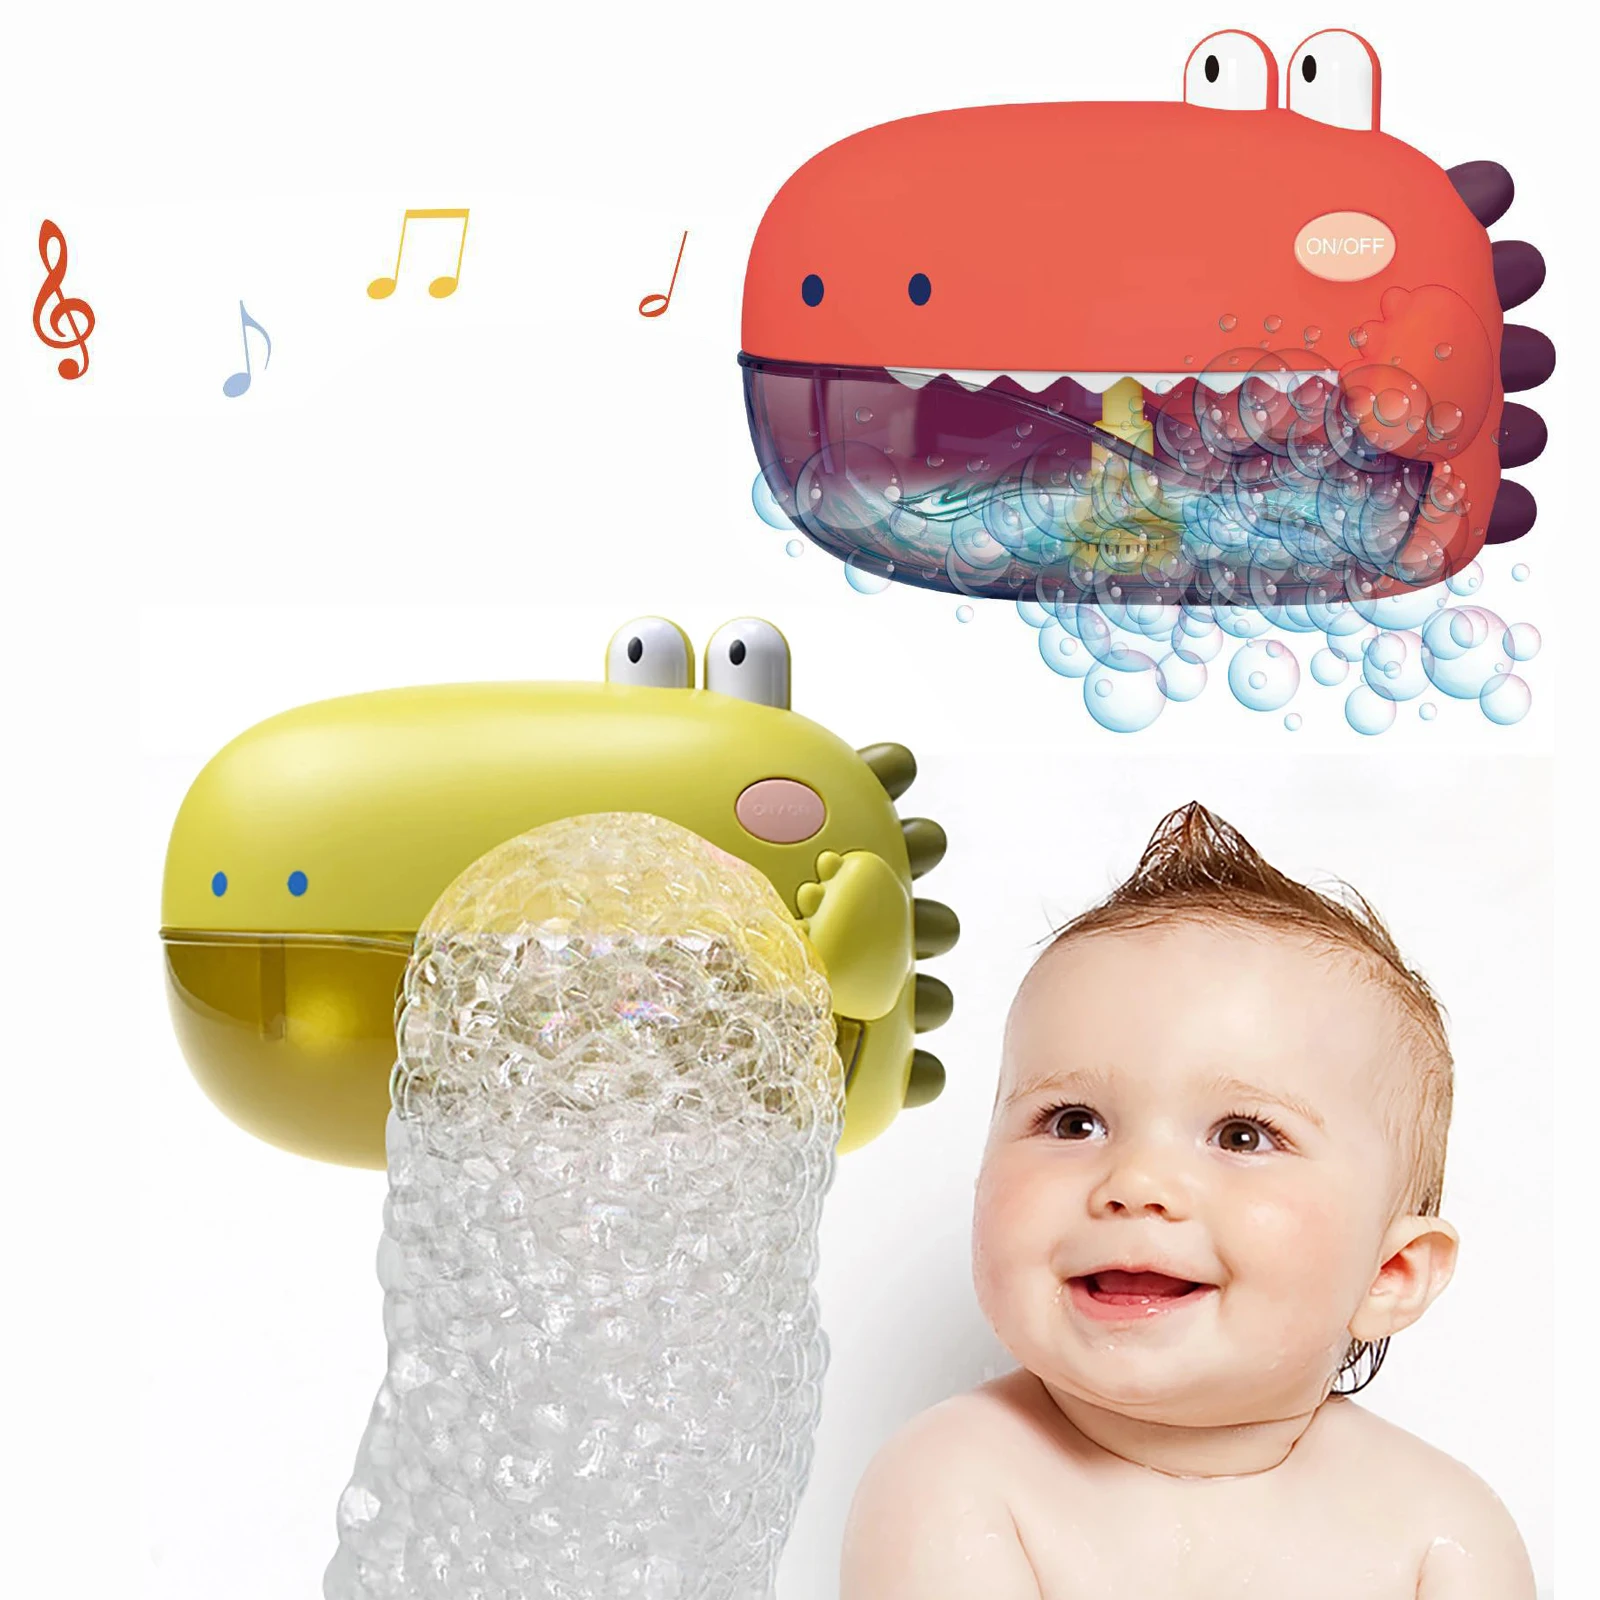 BananMelonBM Bubble Machine Dinosaur Bubble Machine Maker with Self-Walking Music and Lights Effects for Kids Outdoor or Indoor Play & Party Bubble Machine for Toddlers Easy to Use Bath Bubble Toy 